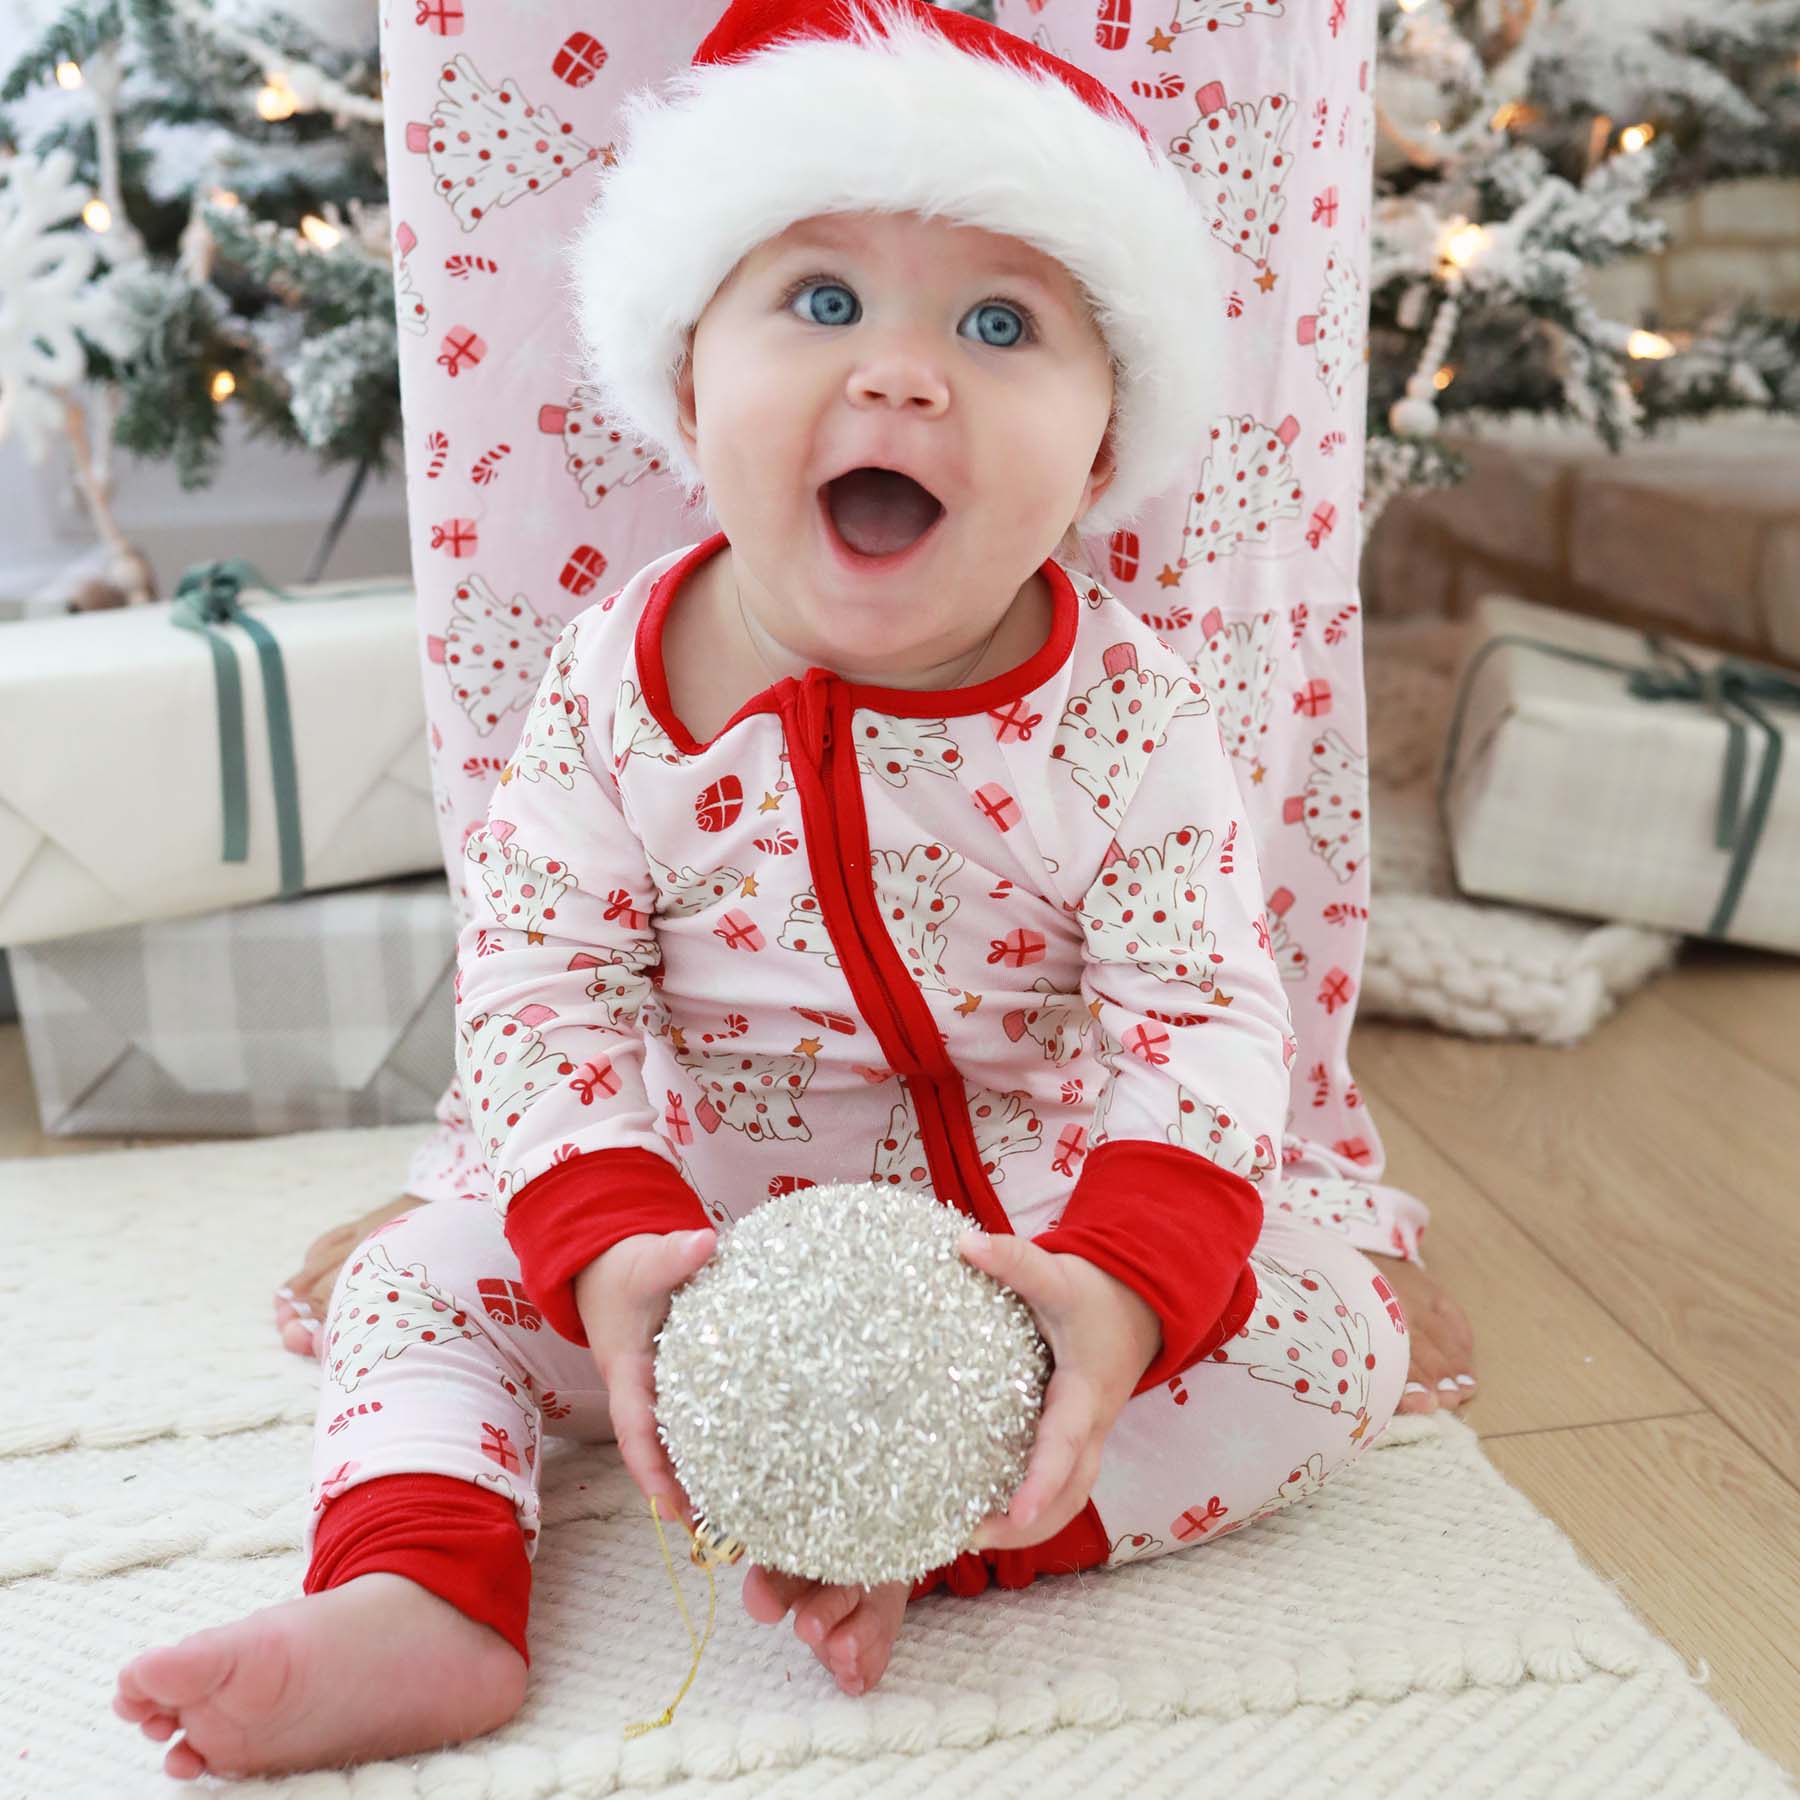 Best Selling Gifts for Babies | Black Friday Sale